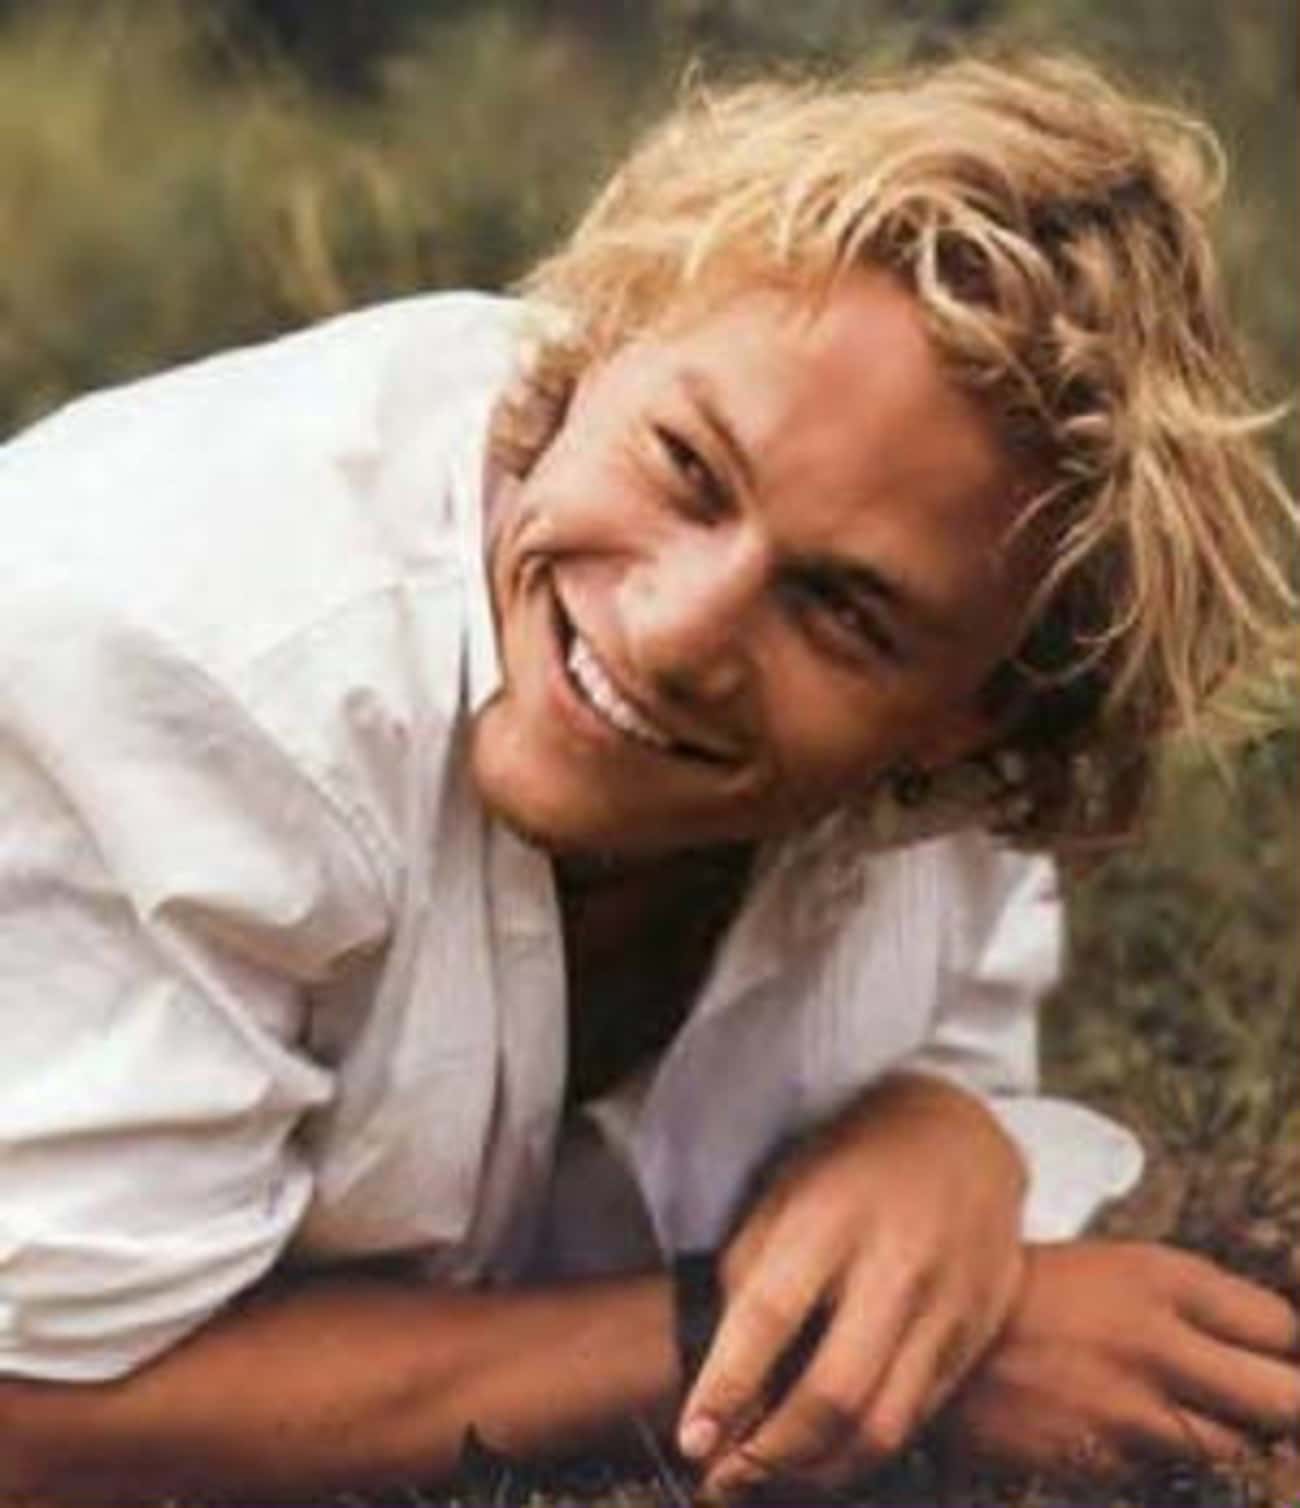 Young Heath Ledger in White Buttondown Lying Down